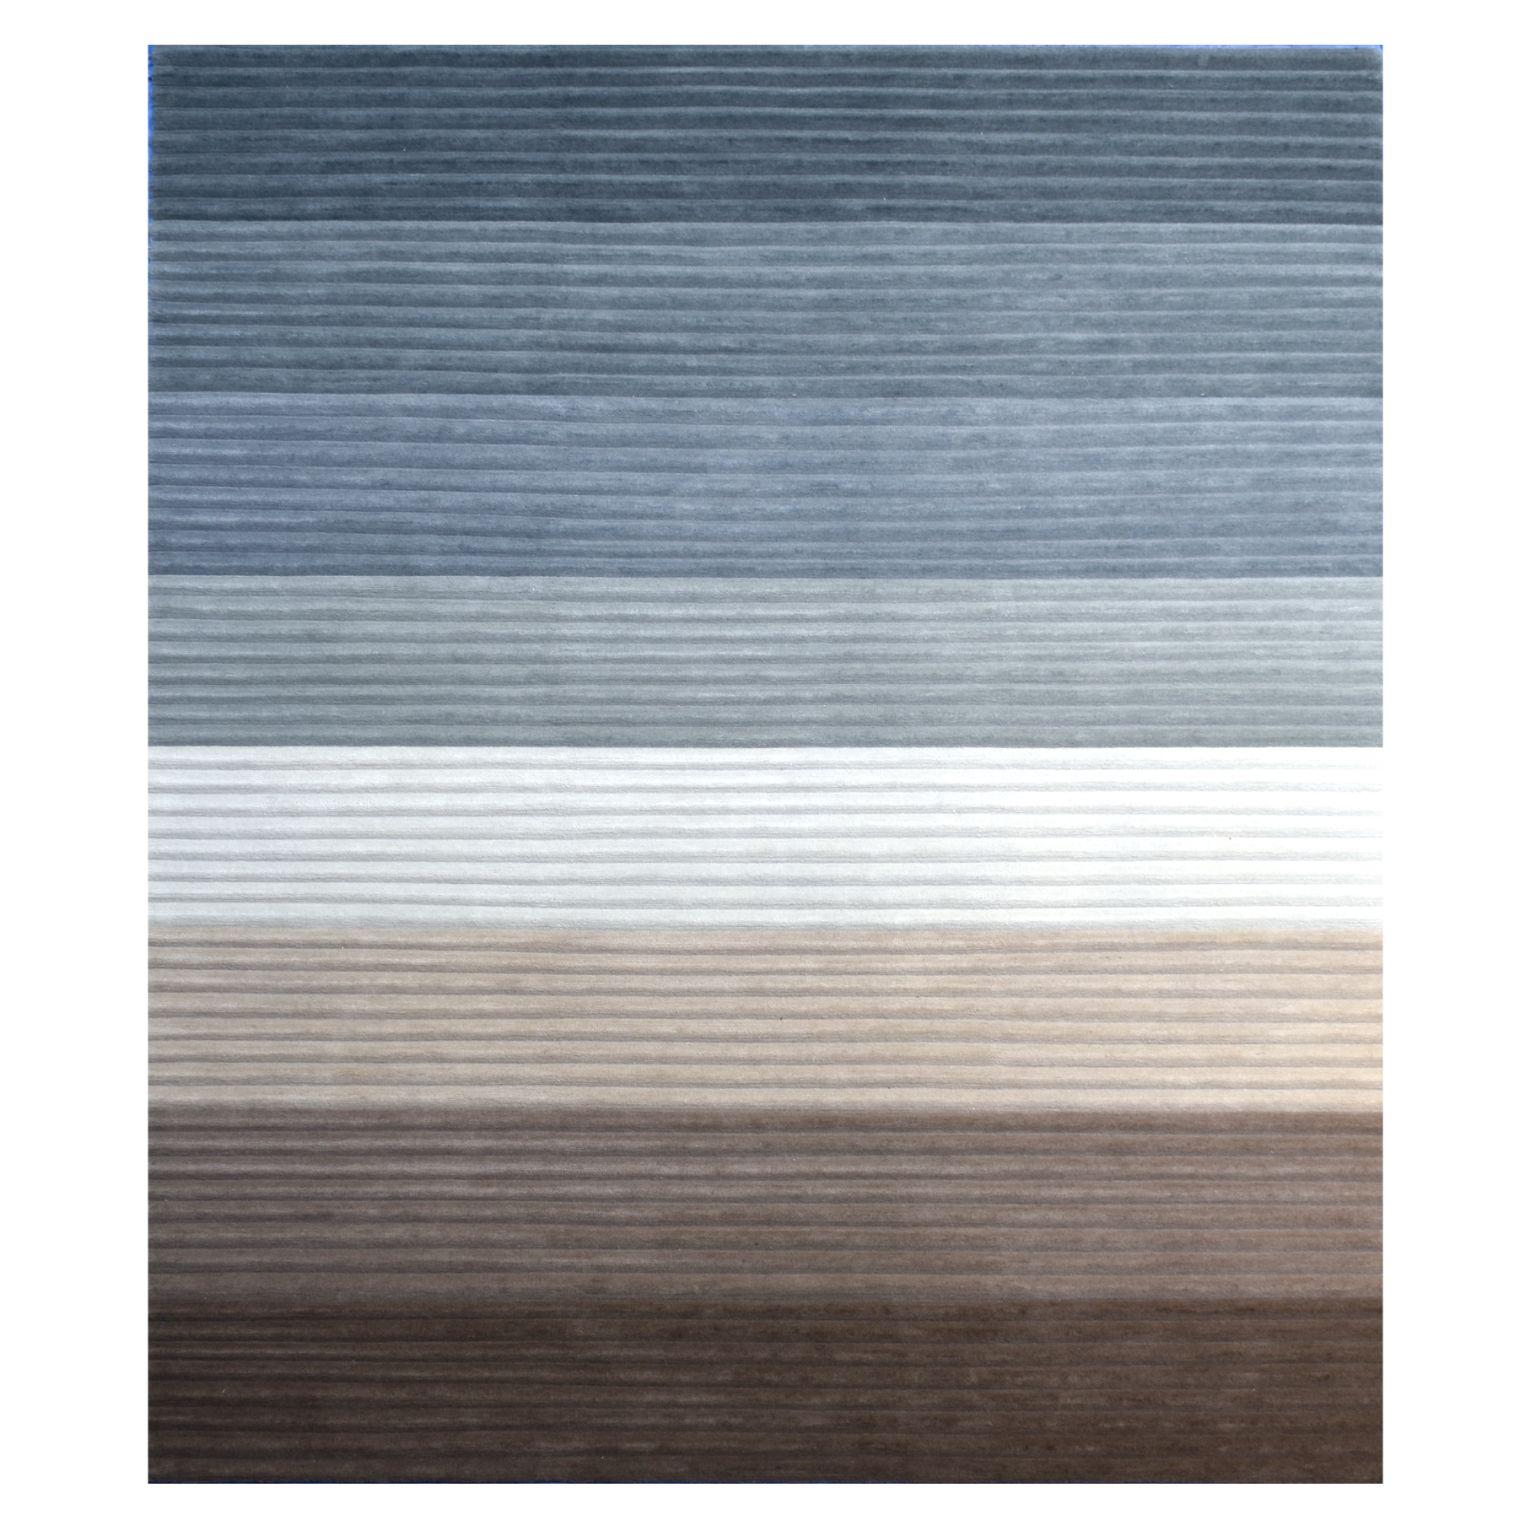 Corduroy large rug by Art & Loom
Dimensions: D 304.8 x H 426.7 cm
Materials: 100% New Zealand wool
Quality (knots per inch): 100
Also available in different dimensions.

Samantha Gallacher has always had a keen eye for aesthetics, drawing